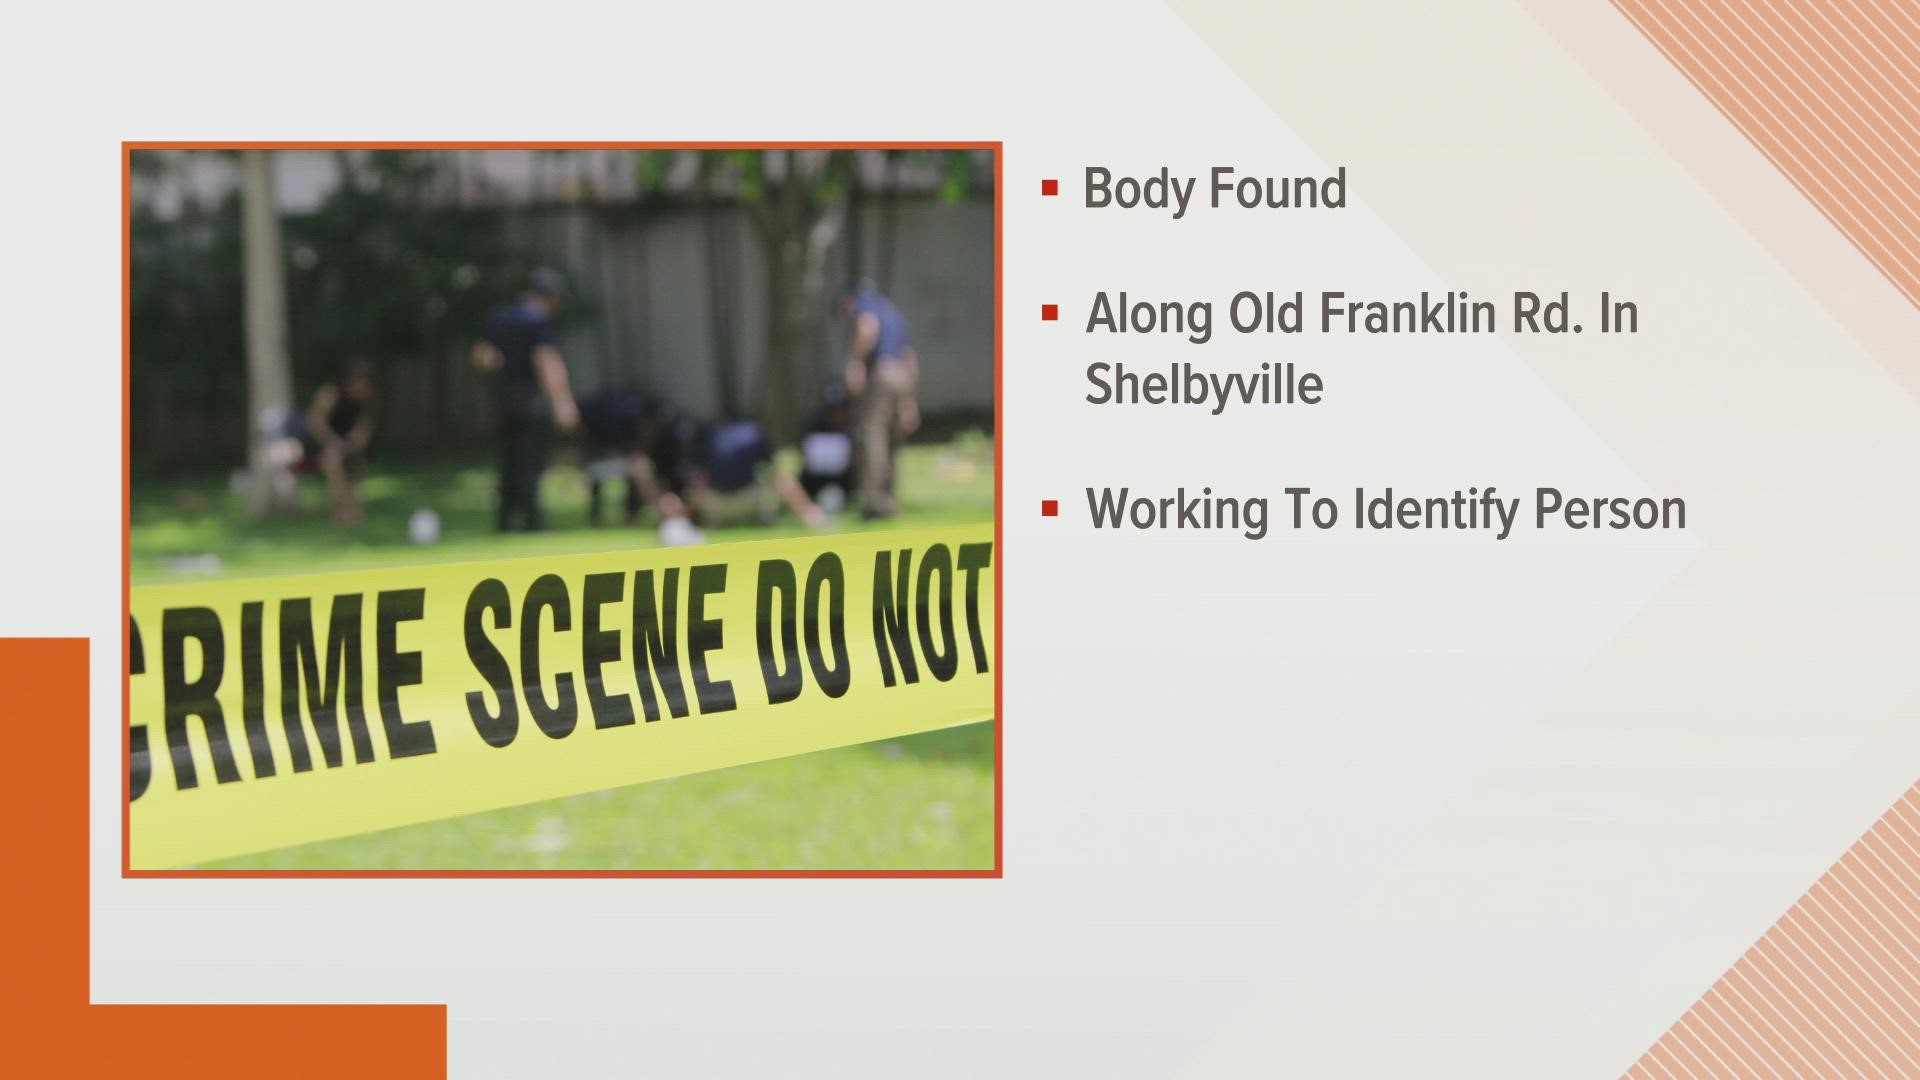 The body was found in the 2900 block of Old Franklin Road in Shelbyville.